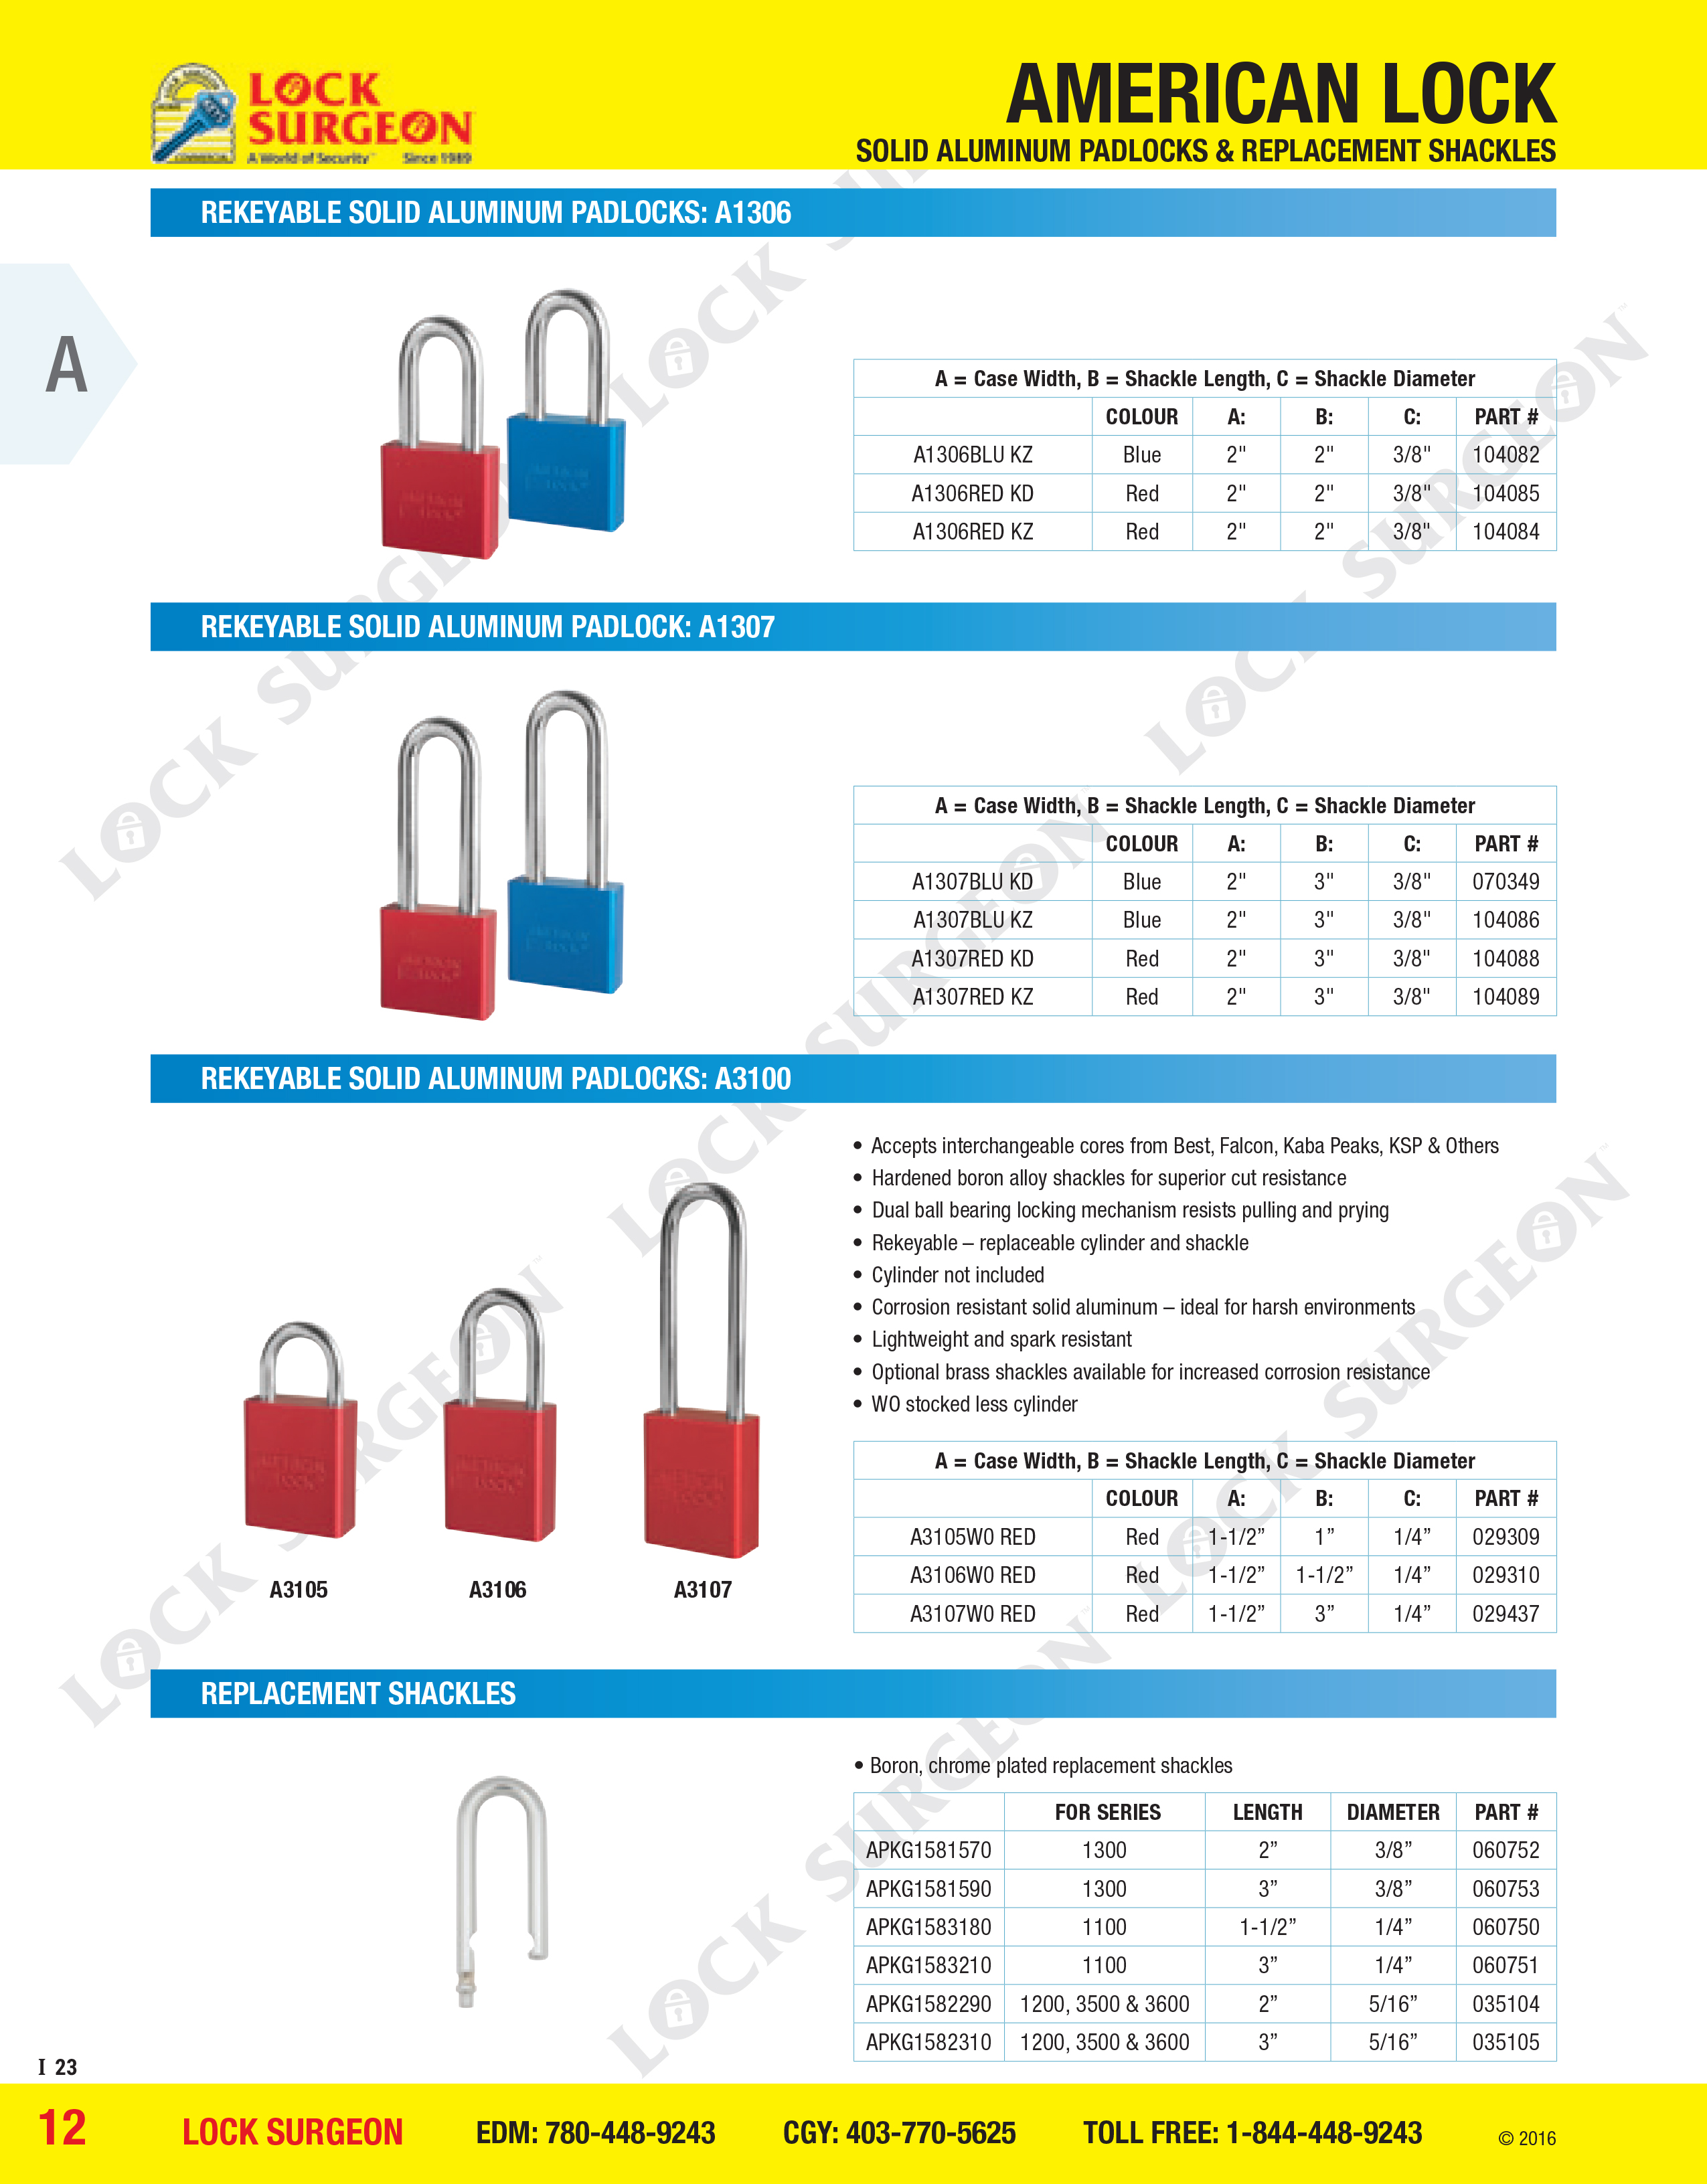 American Lock Rekeyable solid aluminium padlocks A1306, A1307, A3100 series and replacement shackles